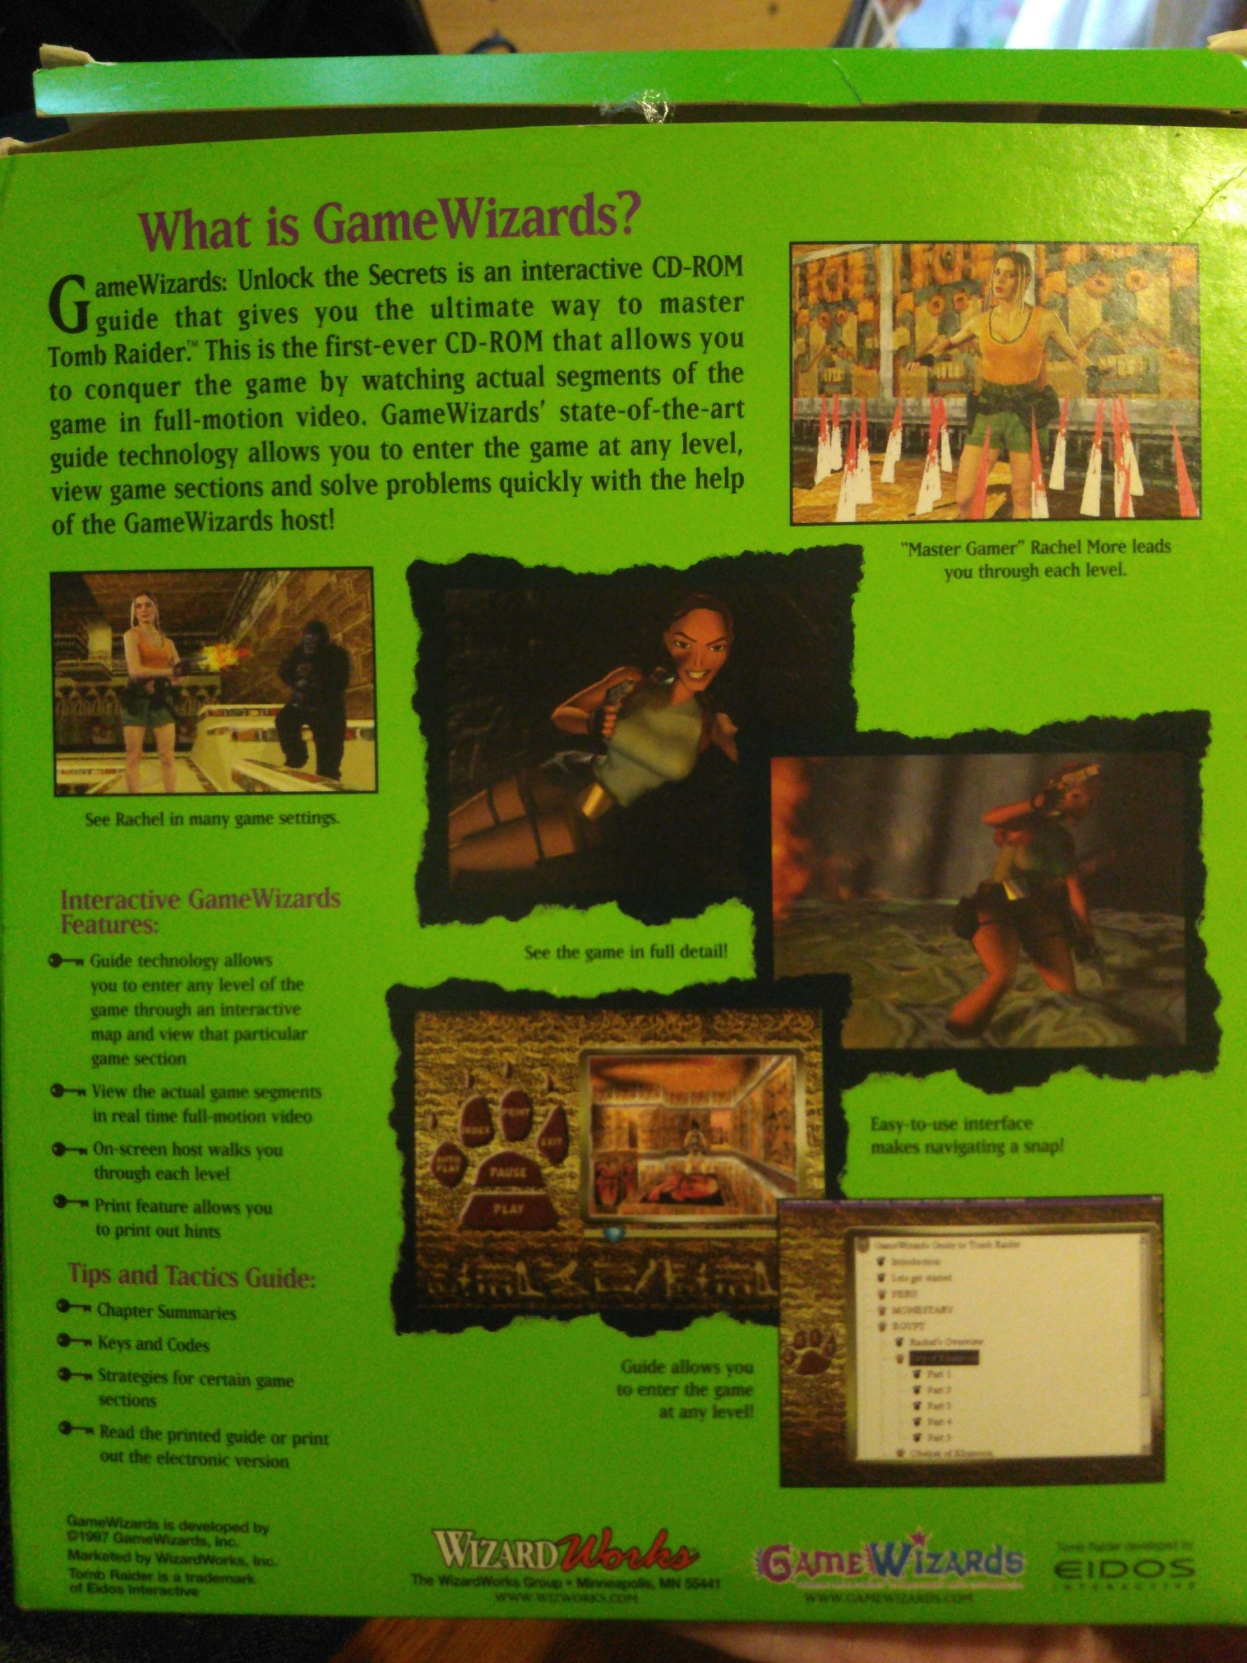 Back cover, showing screenshots of the software and asserting "This is the first ever CD ROM that allows you to conquer the game by watching actual segments of the game in full-motion video."